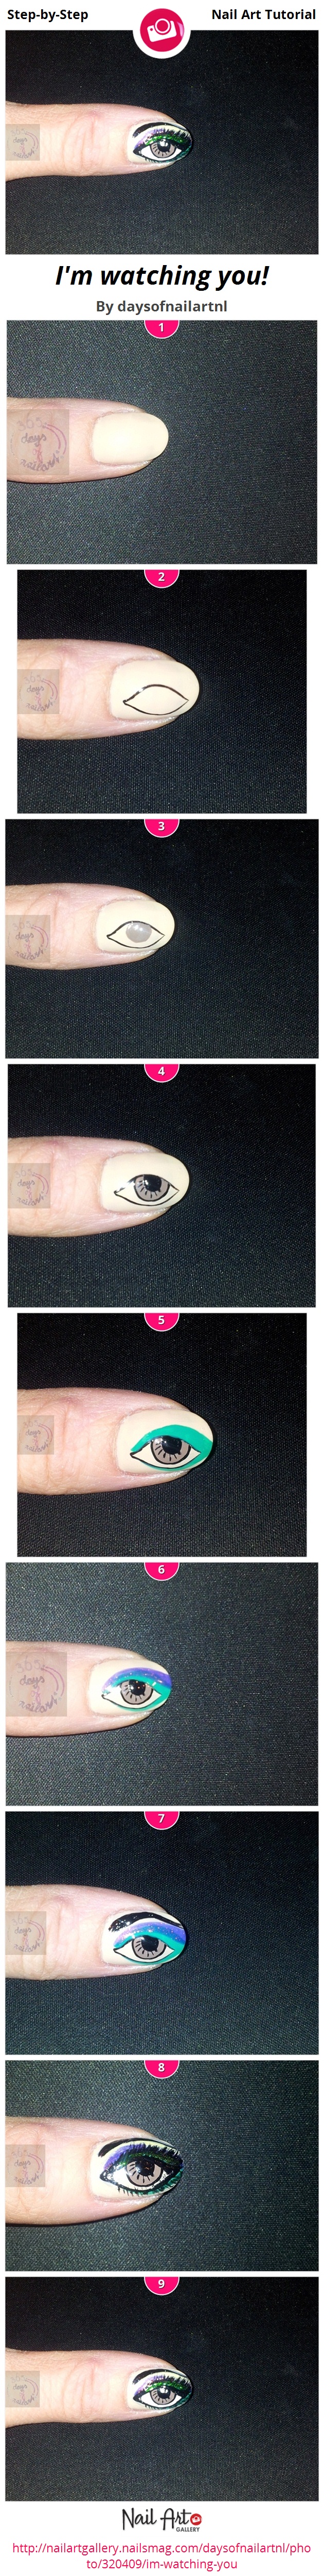 I'm watching you! - Nail Art Gallery